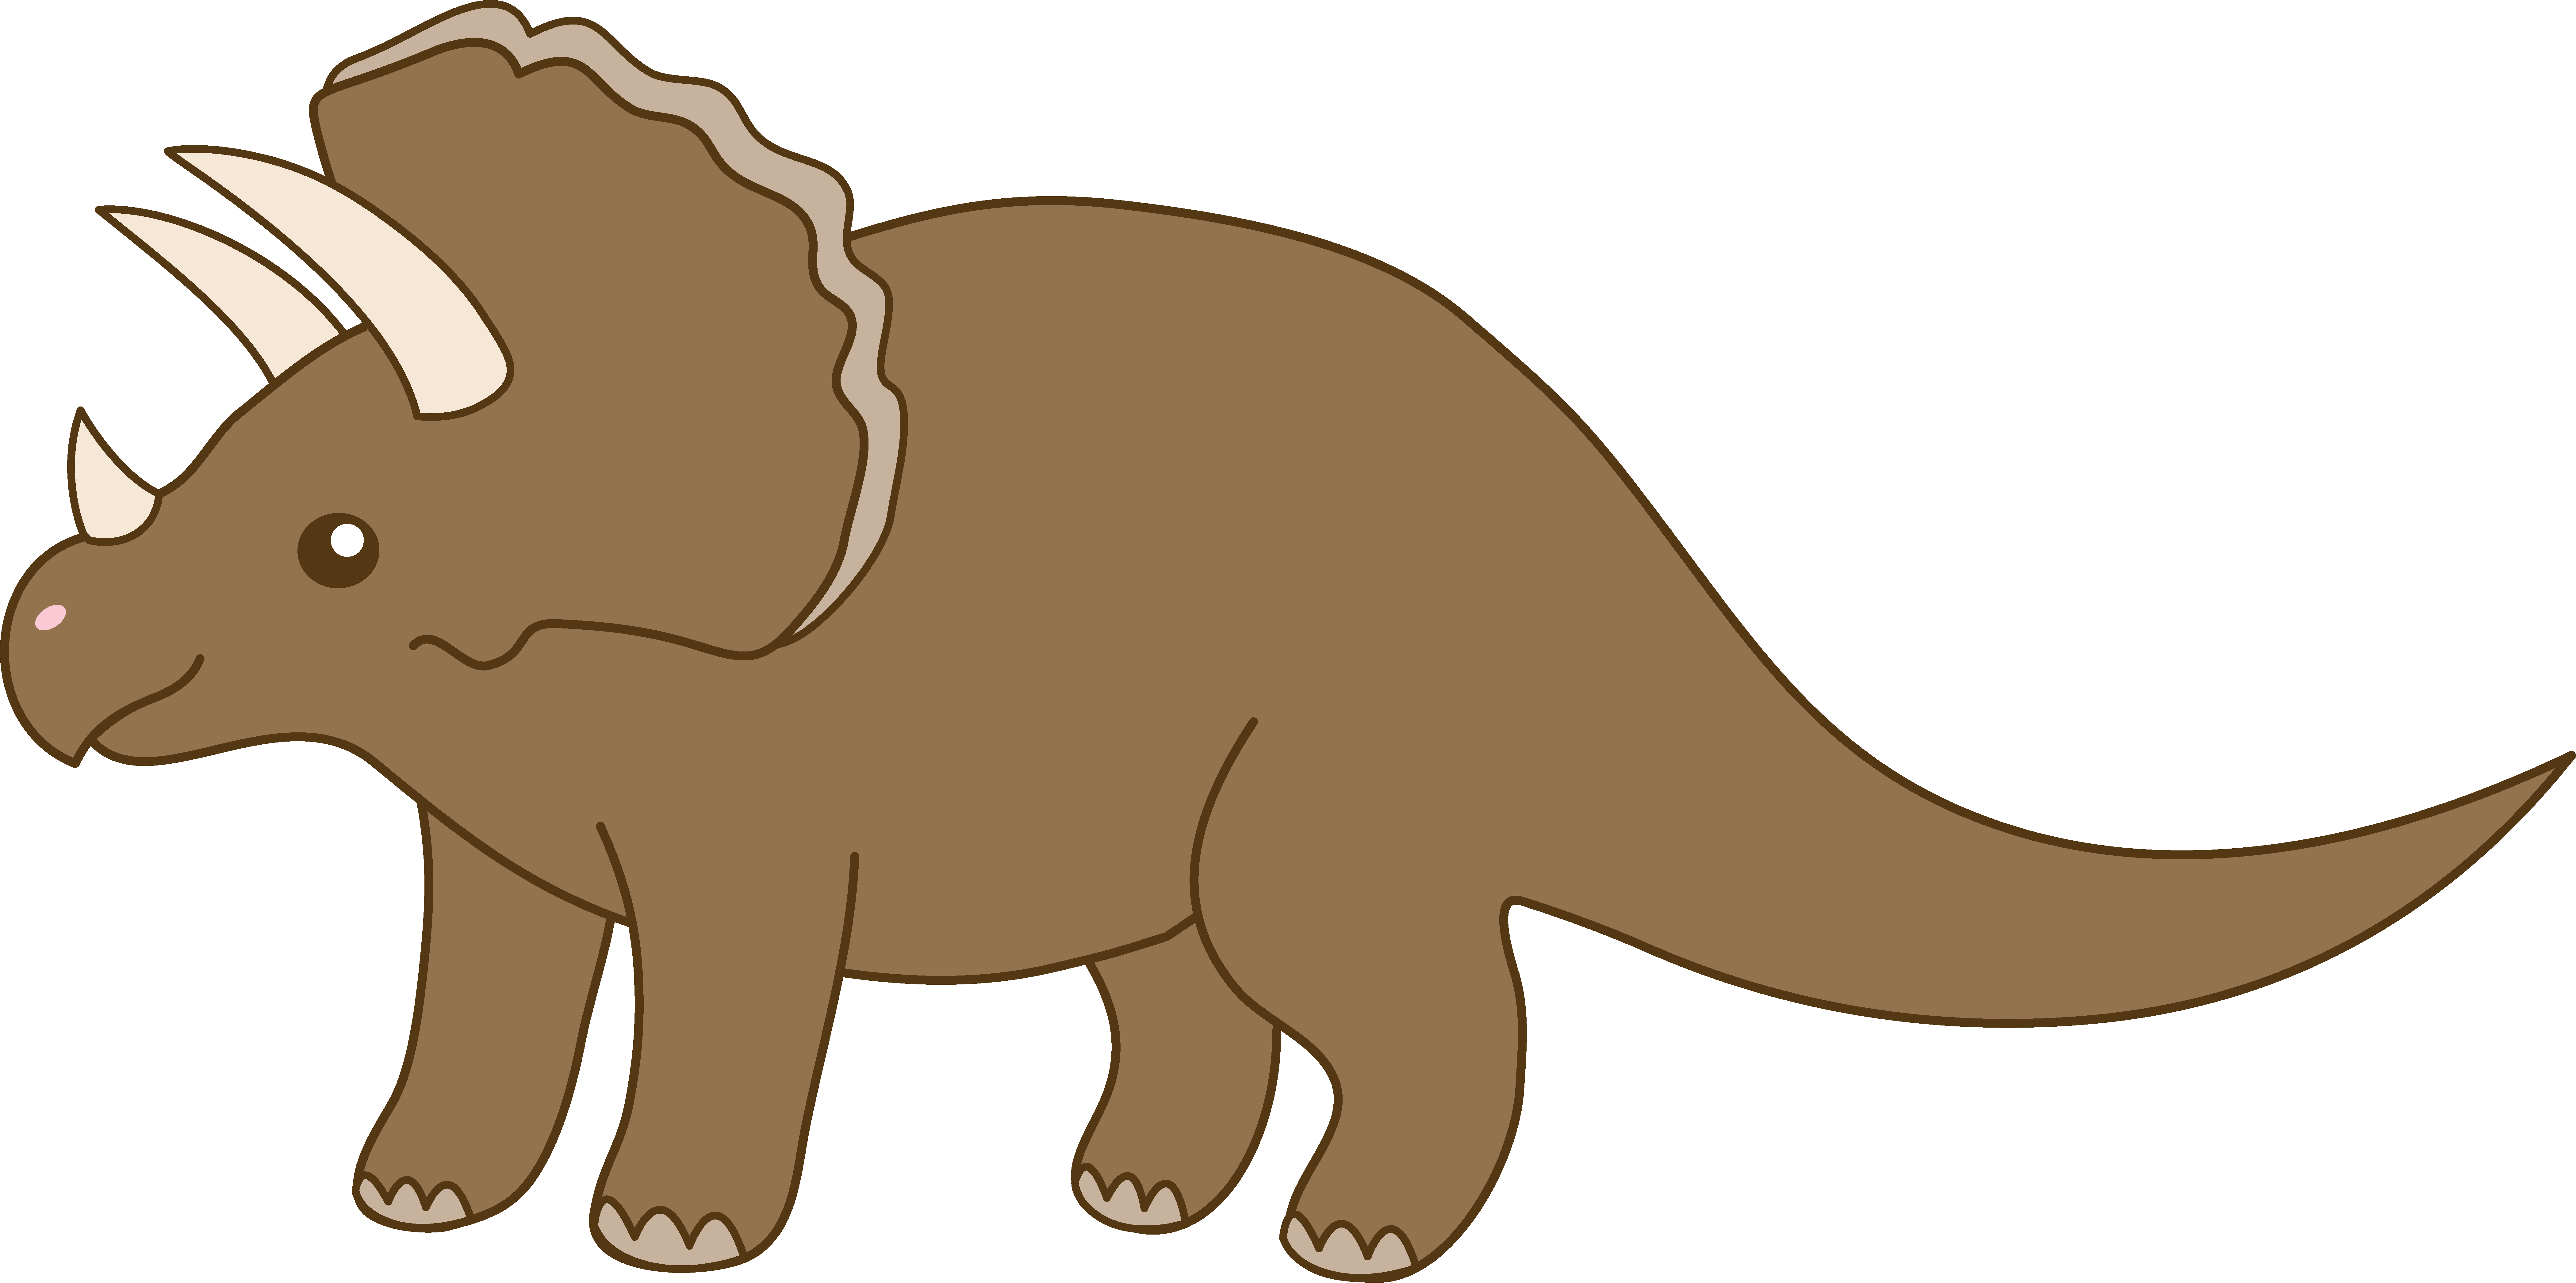 Cute Dinosaur Clip Art Images  Pictures - Becuo